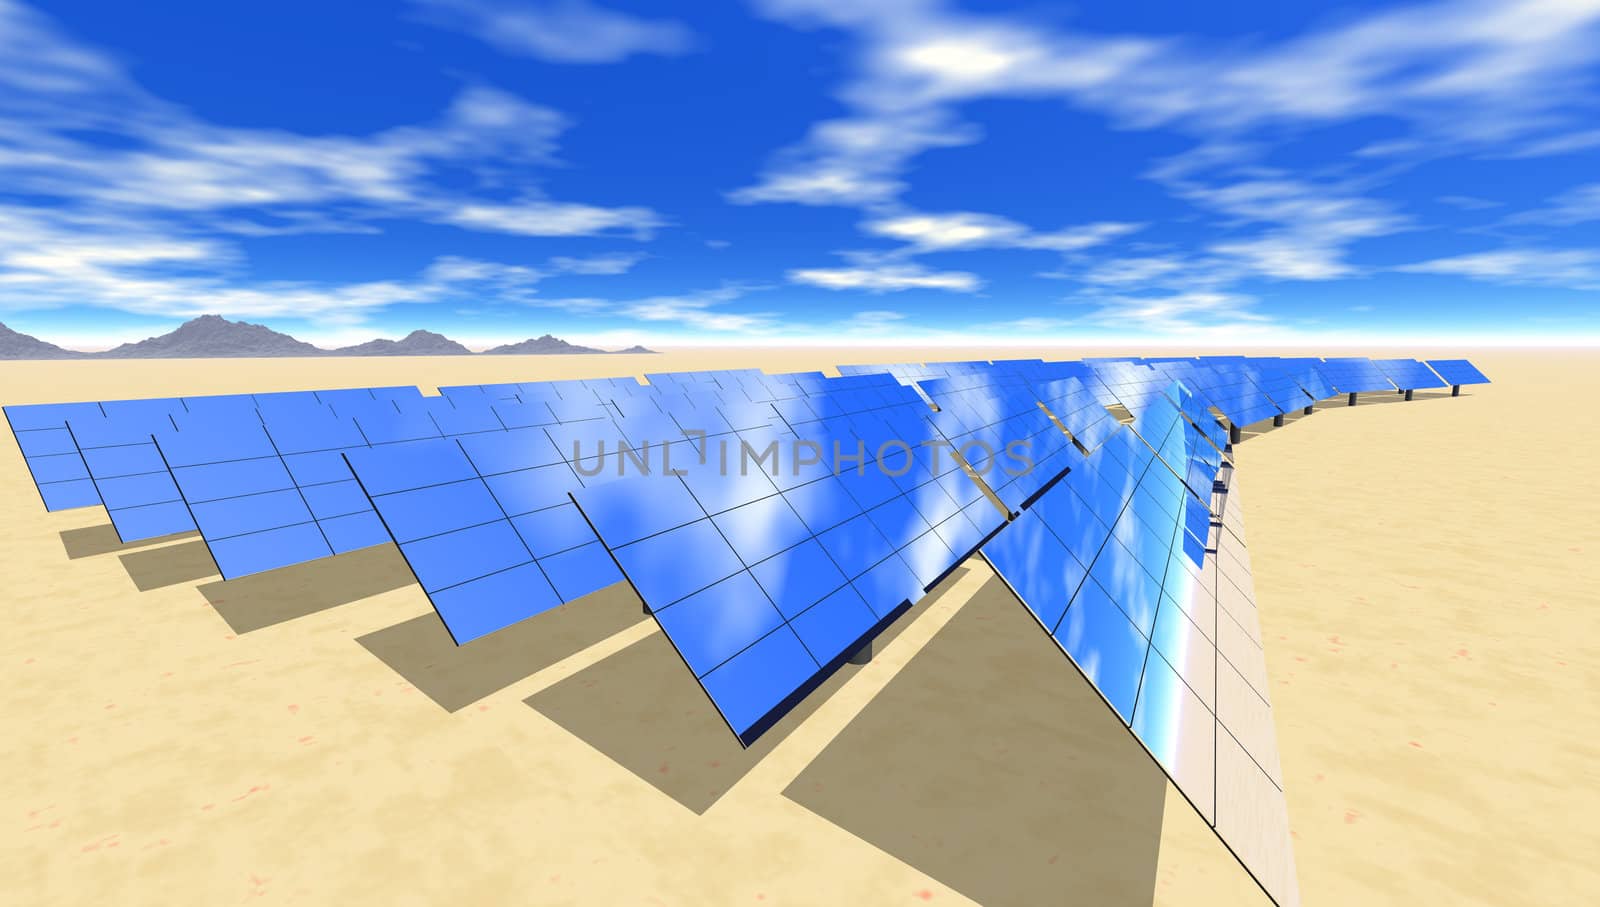 Solar electric panels in desert with clouds